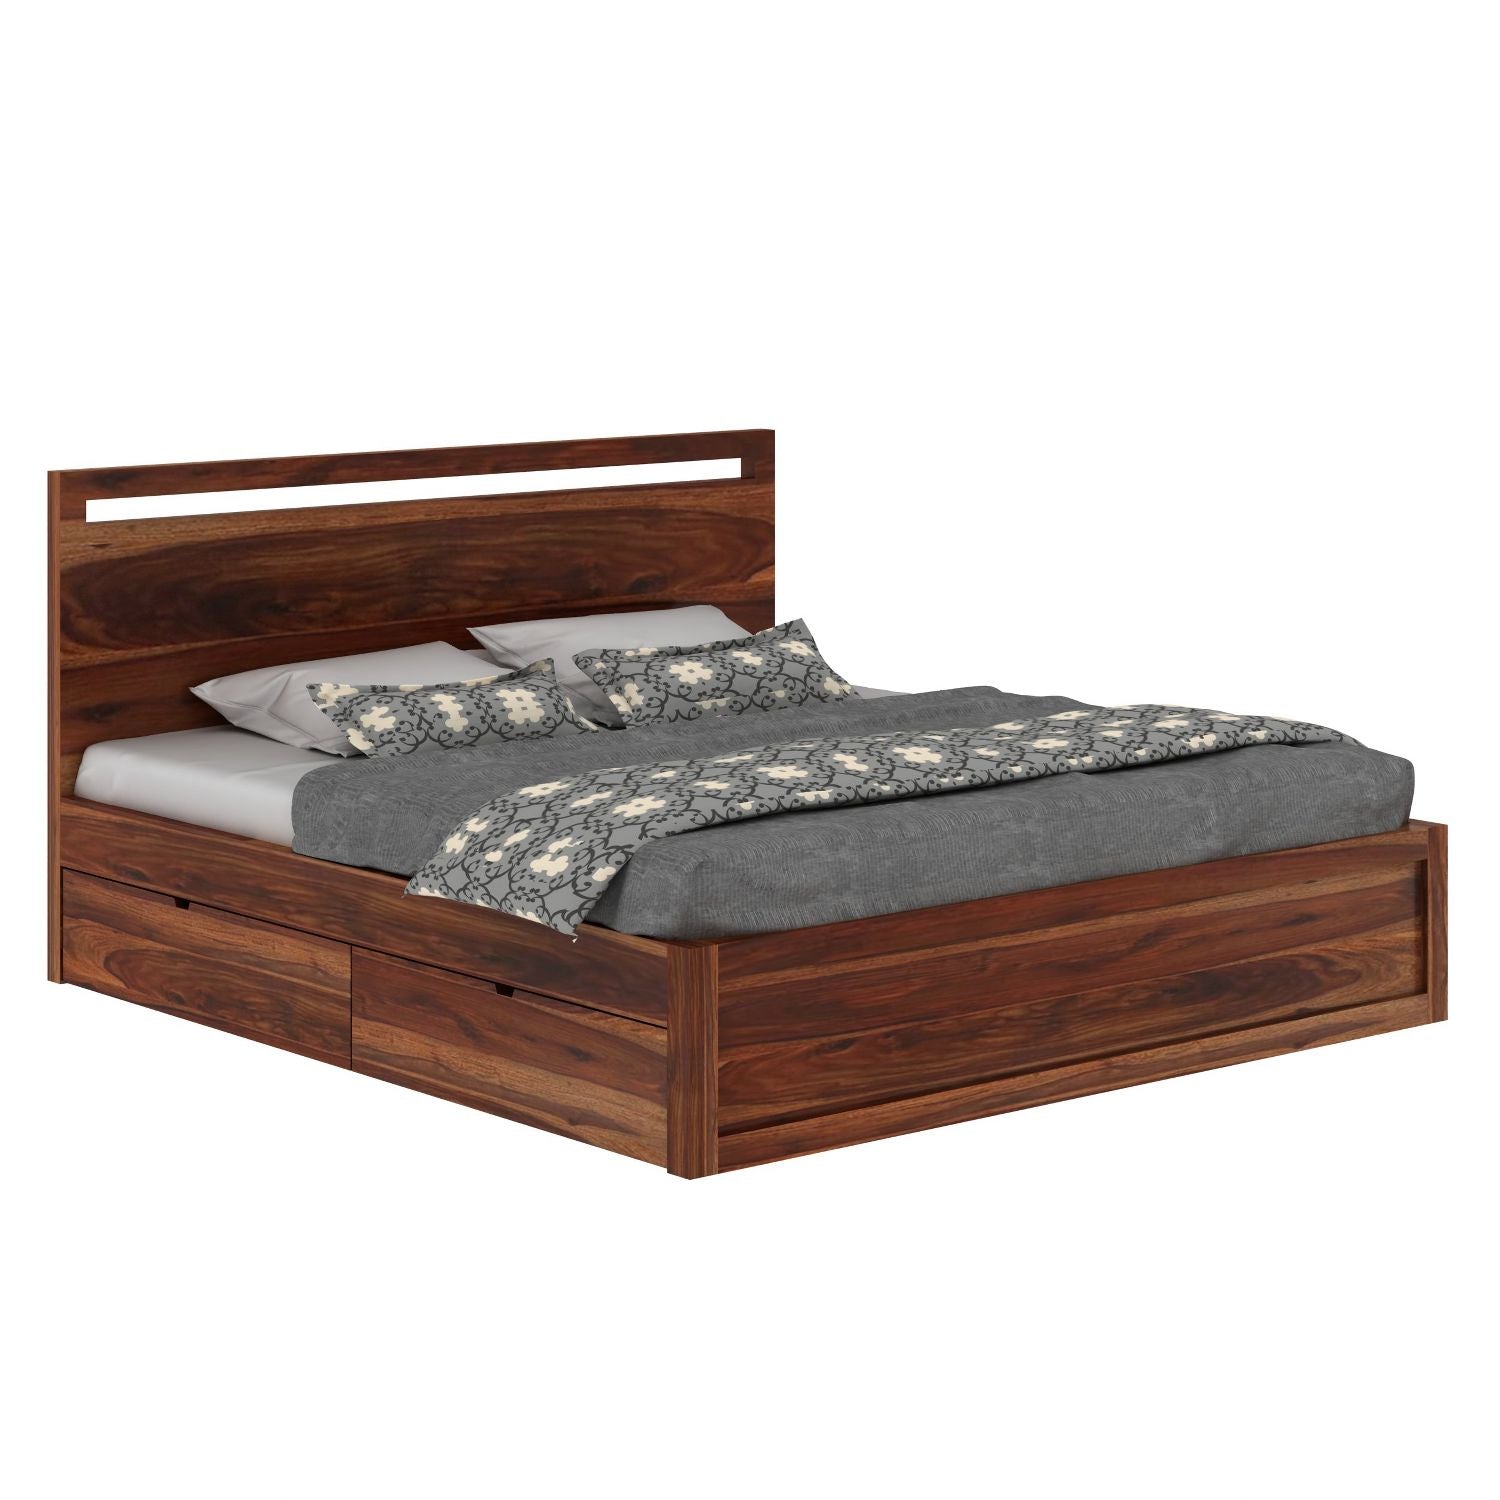 Livinn Solid Sheesham Wood Bed With Four Drawers (Queen Size, Natural Finish)